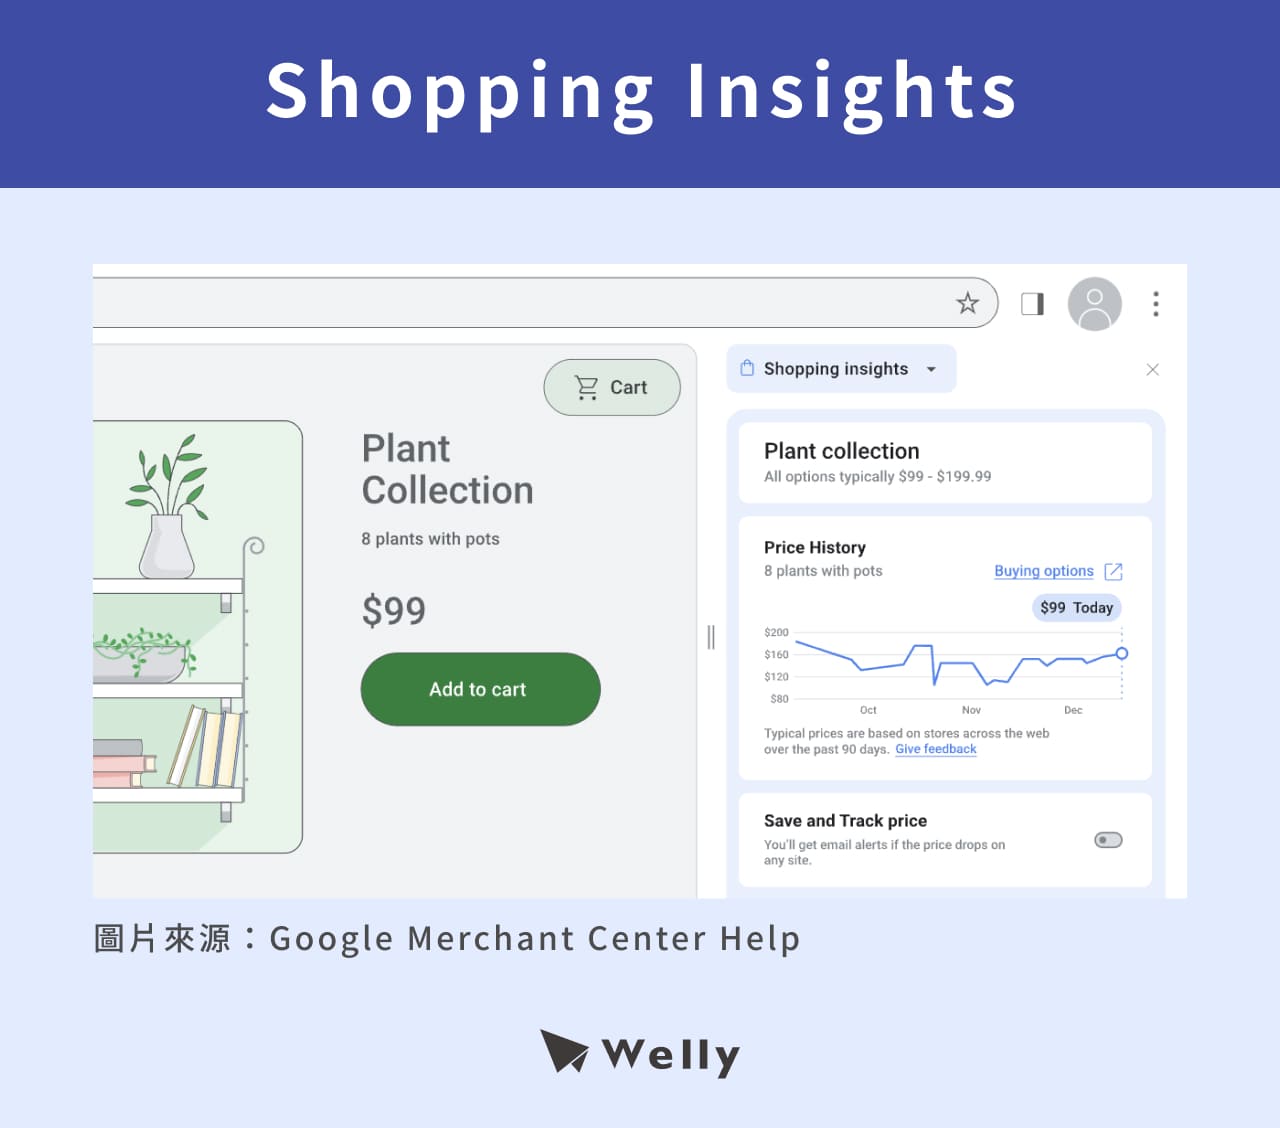 Shopping insights